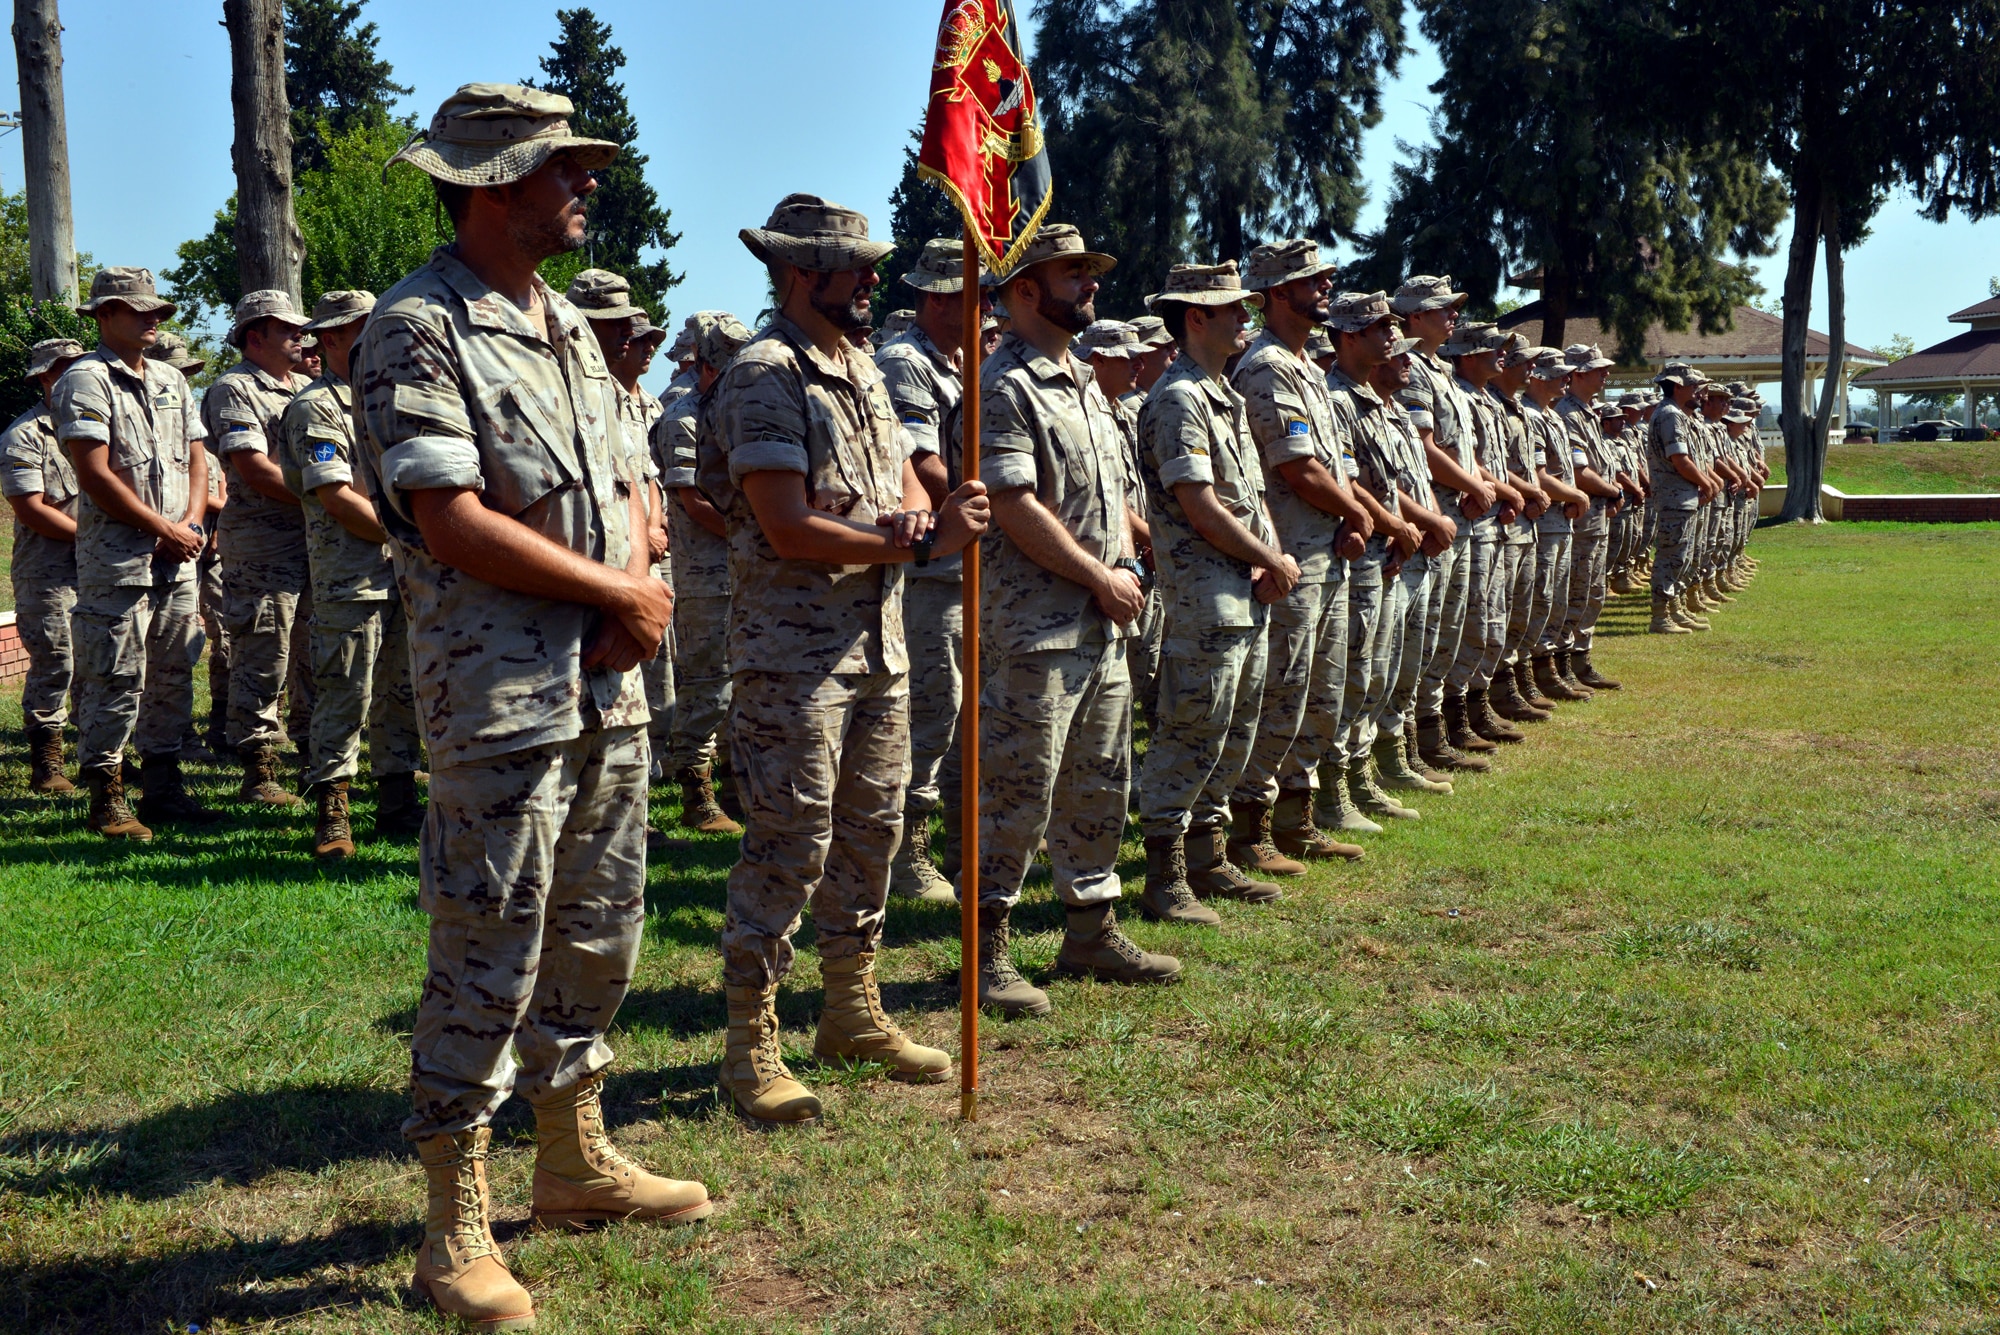 Soldiers from the Spanish Patriot Unit stand in formation awaiting the Transfer of Authority ceremony July 22, 2015, at Incirlik Air Base, Turkey. Spanish CDR. Jorge Cotorruelo, outgoing Spanish Patriot Unit commander, relinquished command to Army Artillery LTC Juan Castilla, incoming SPU commander. (U.S. Air Force photo by Senior Airman Michael Battles/Released)